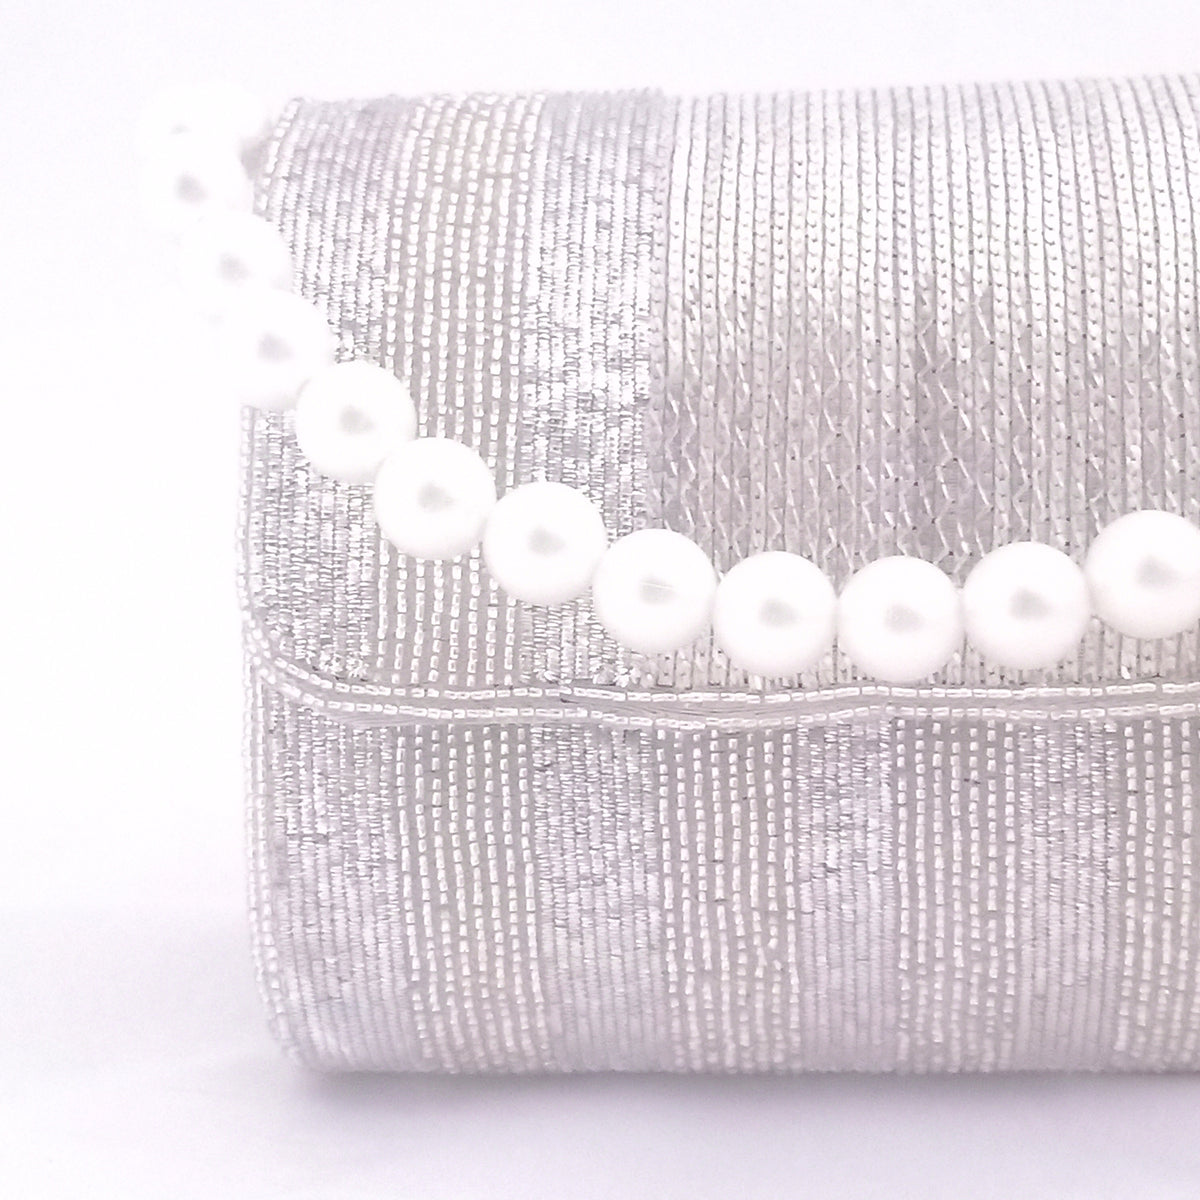 Silver flap over clutch